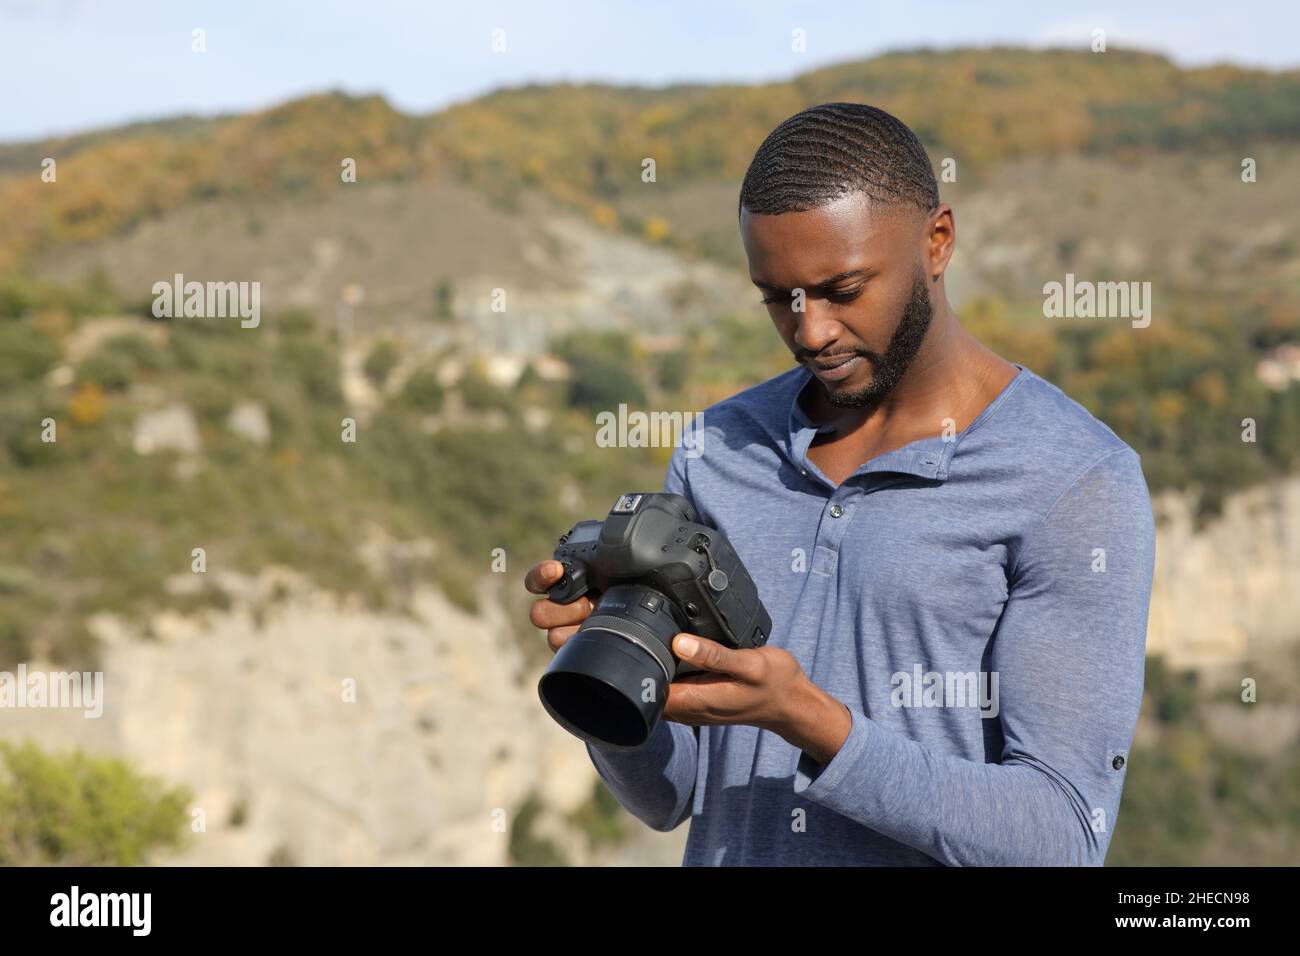 Concentrated man with black skin checking photos on dslr camera in nature Stock Photo